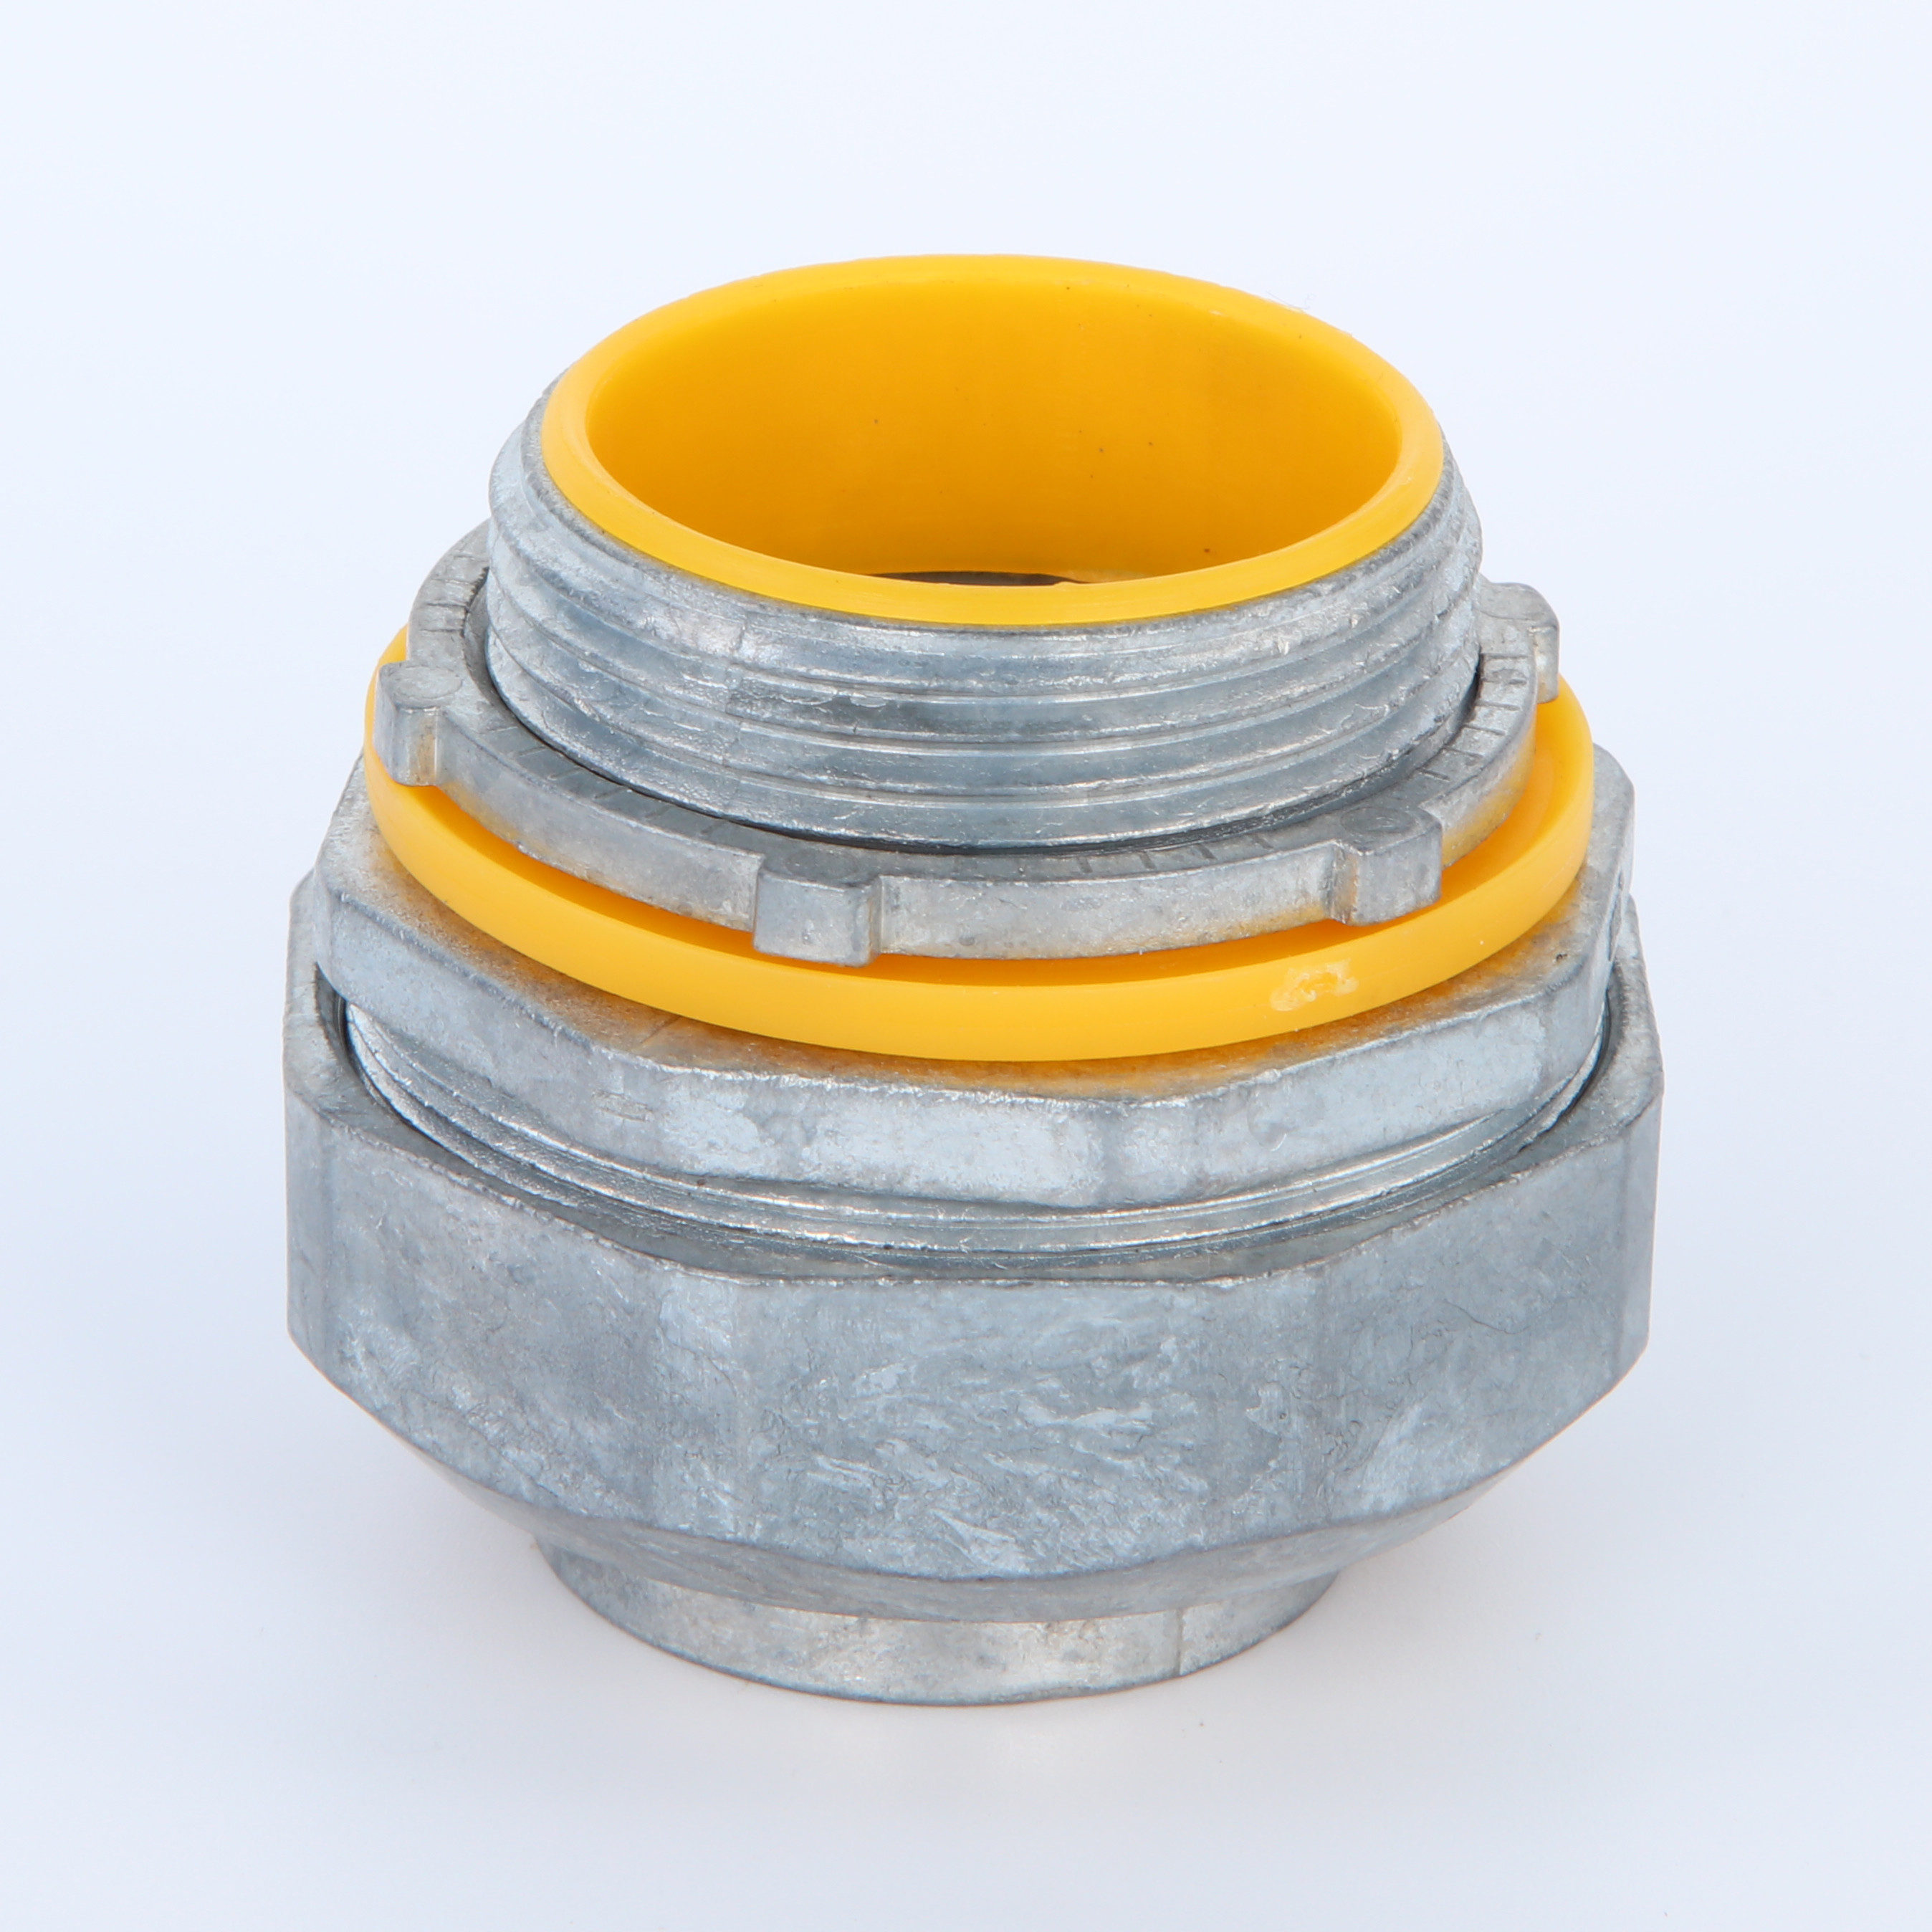 Liquid Tight Flexible Conduit Yellow Pvc Insulated Zamak 3 Die Casting UL Listed From3/8 to 4